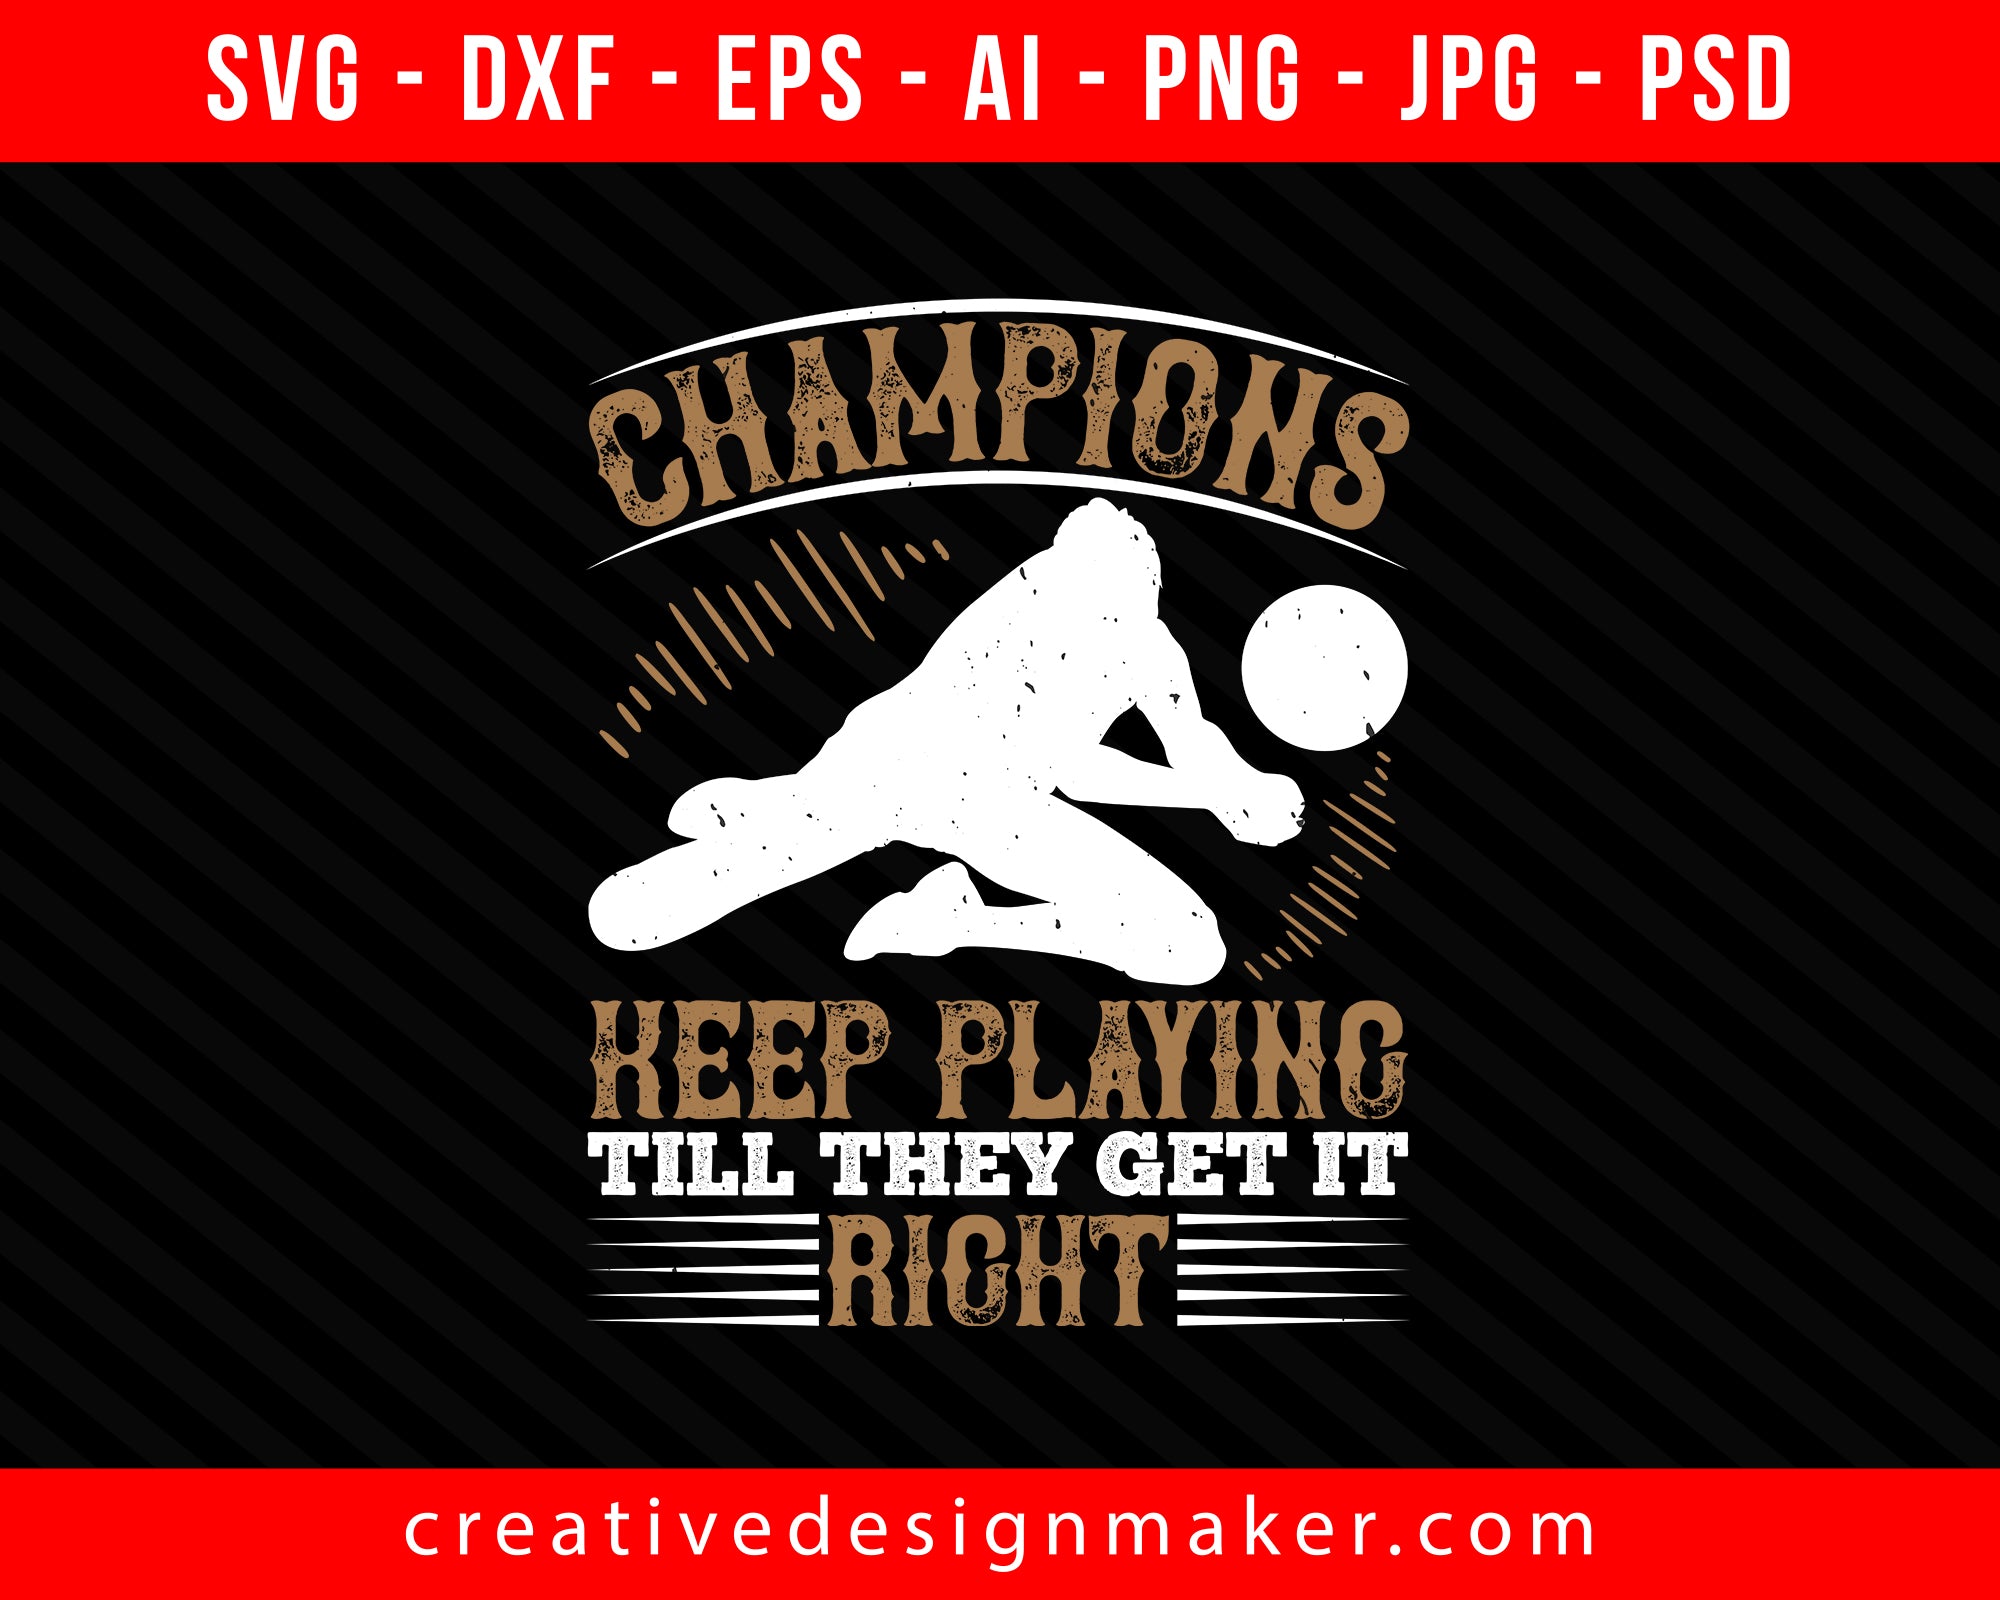 Champions keep playing till they get it right Vollyball Print Ready Editable T-Shirt SVG Design!